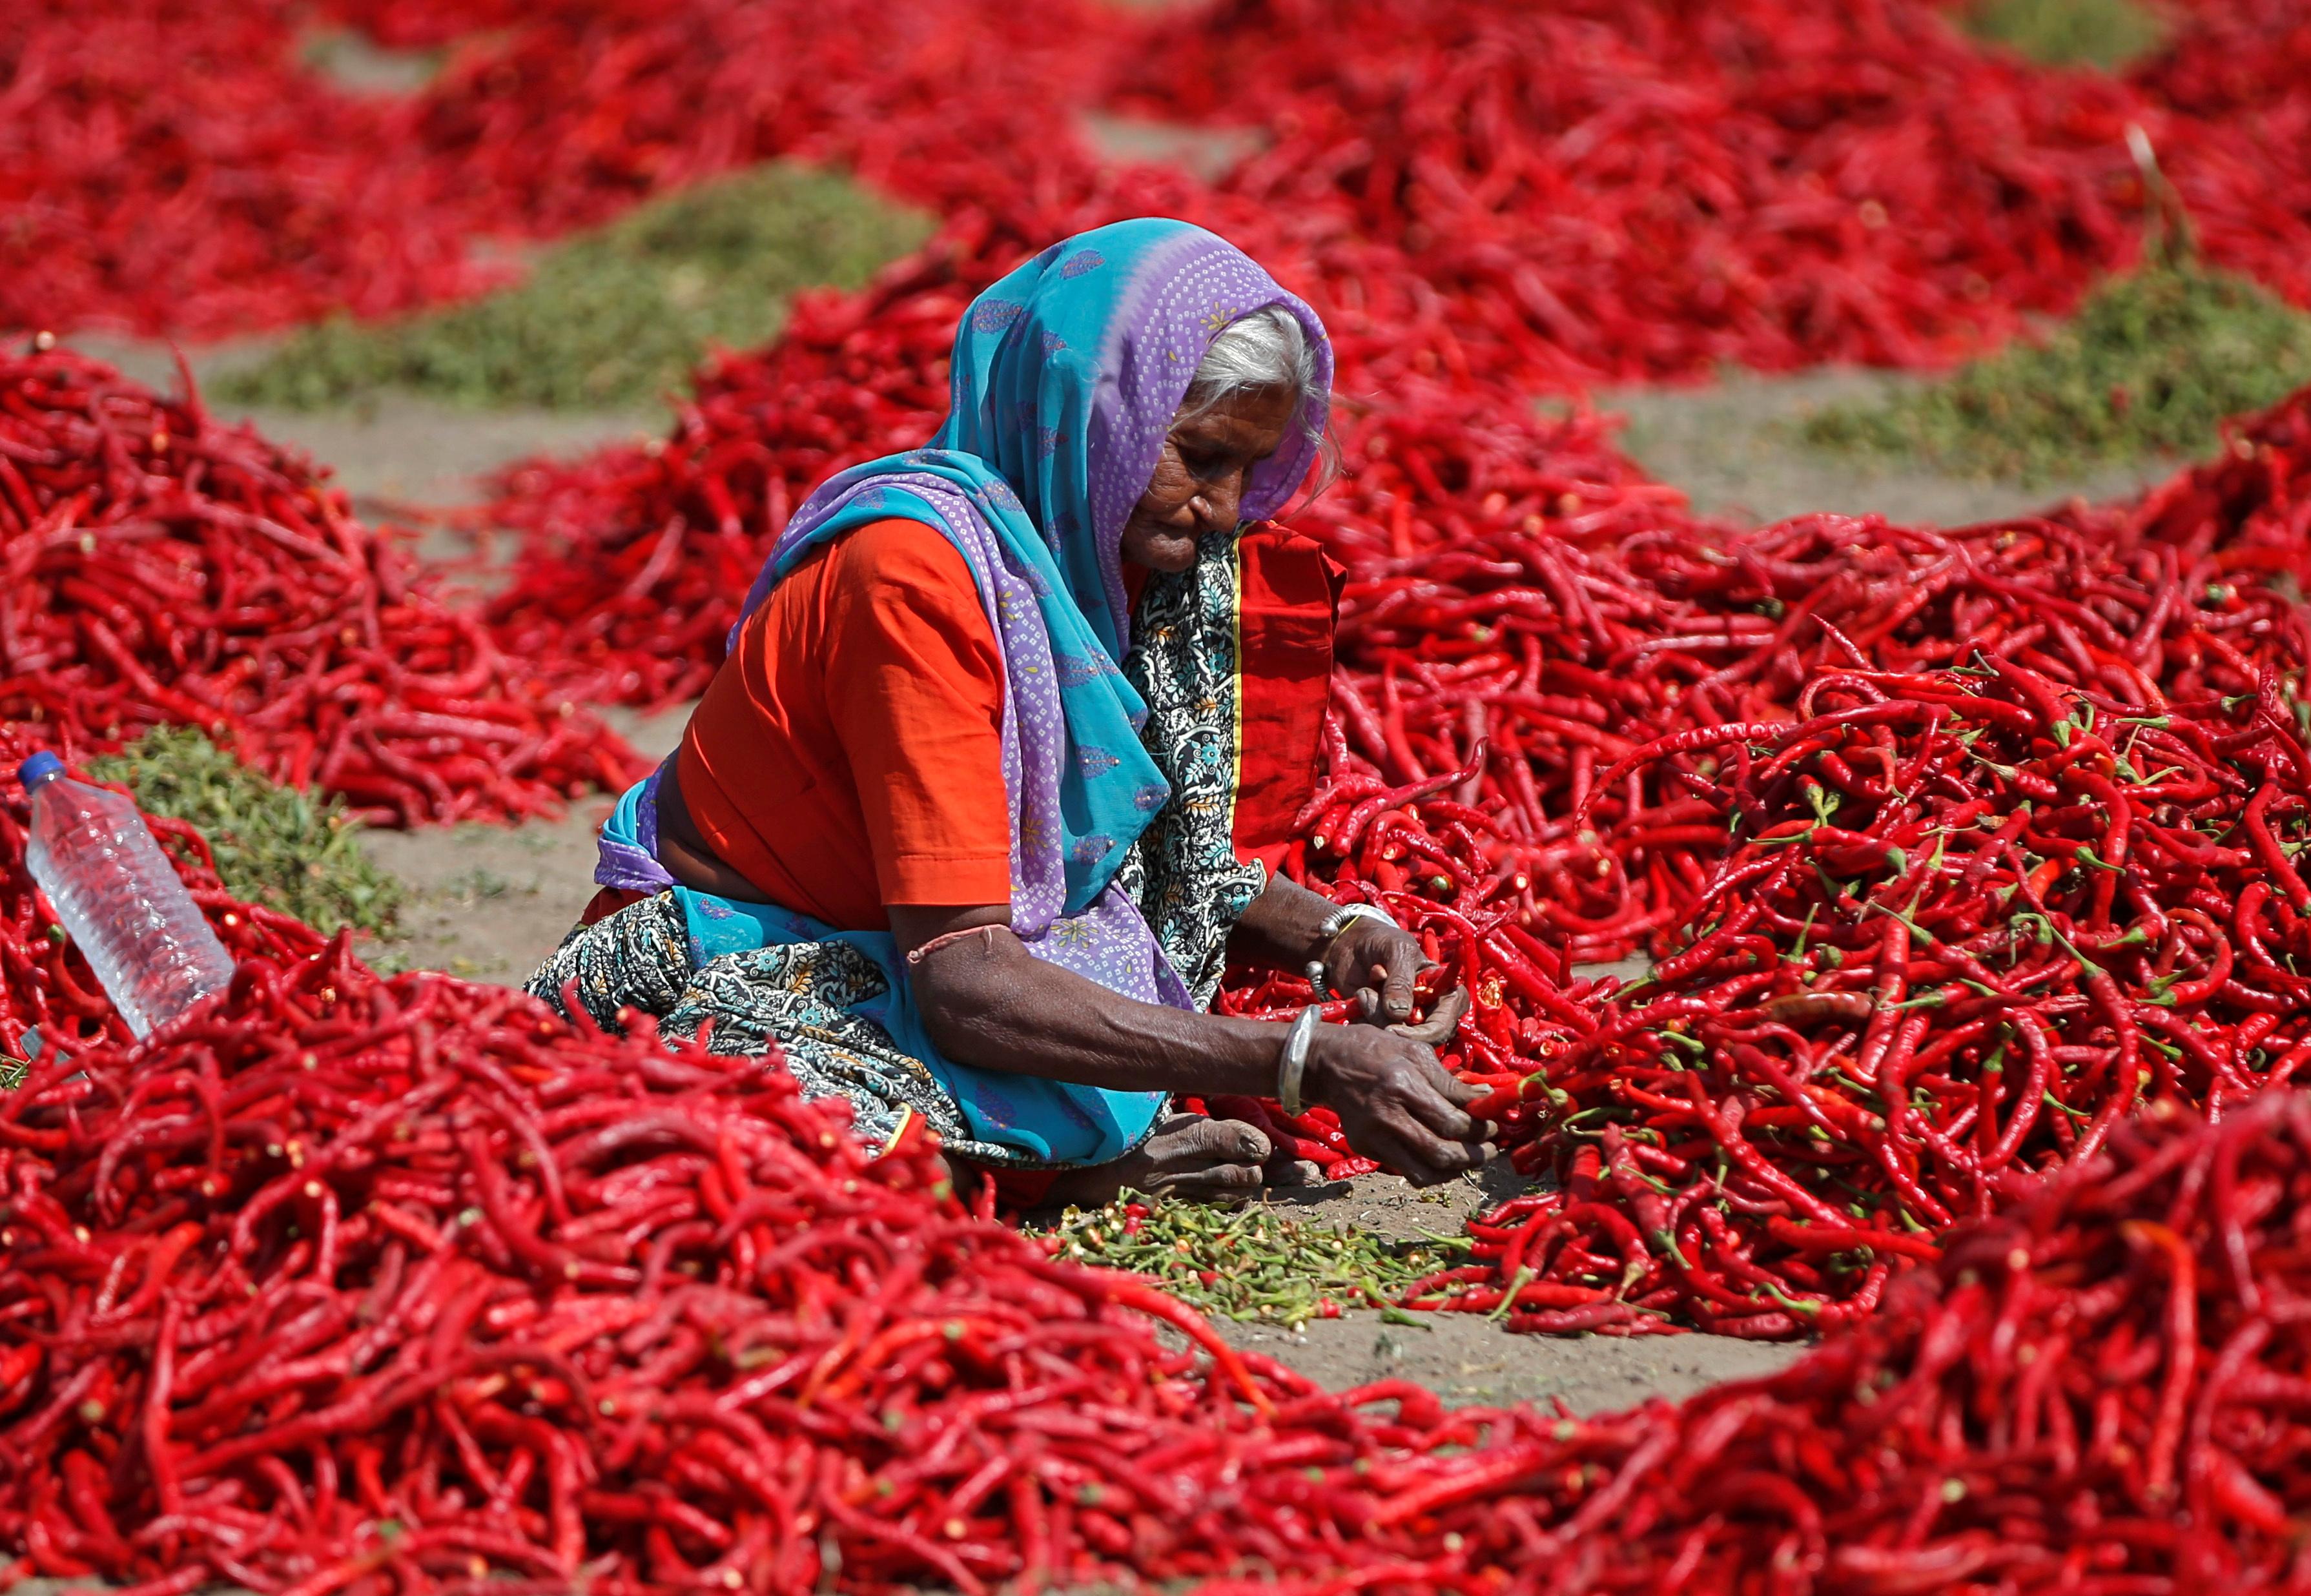 A woman removes stalks from red chilli peppers at a farm in Shertha village on the outskirts of Ahmedabad